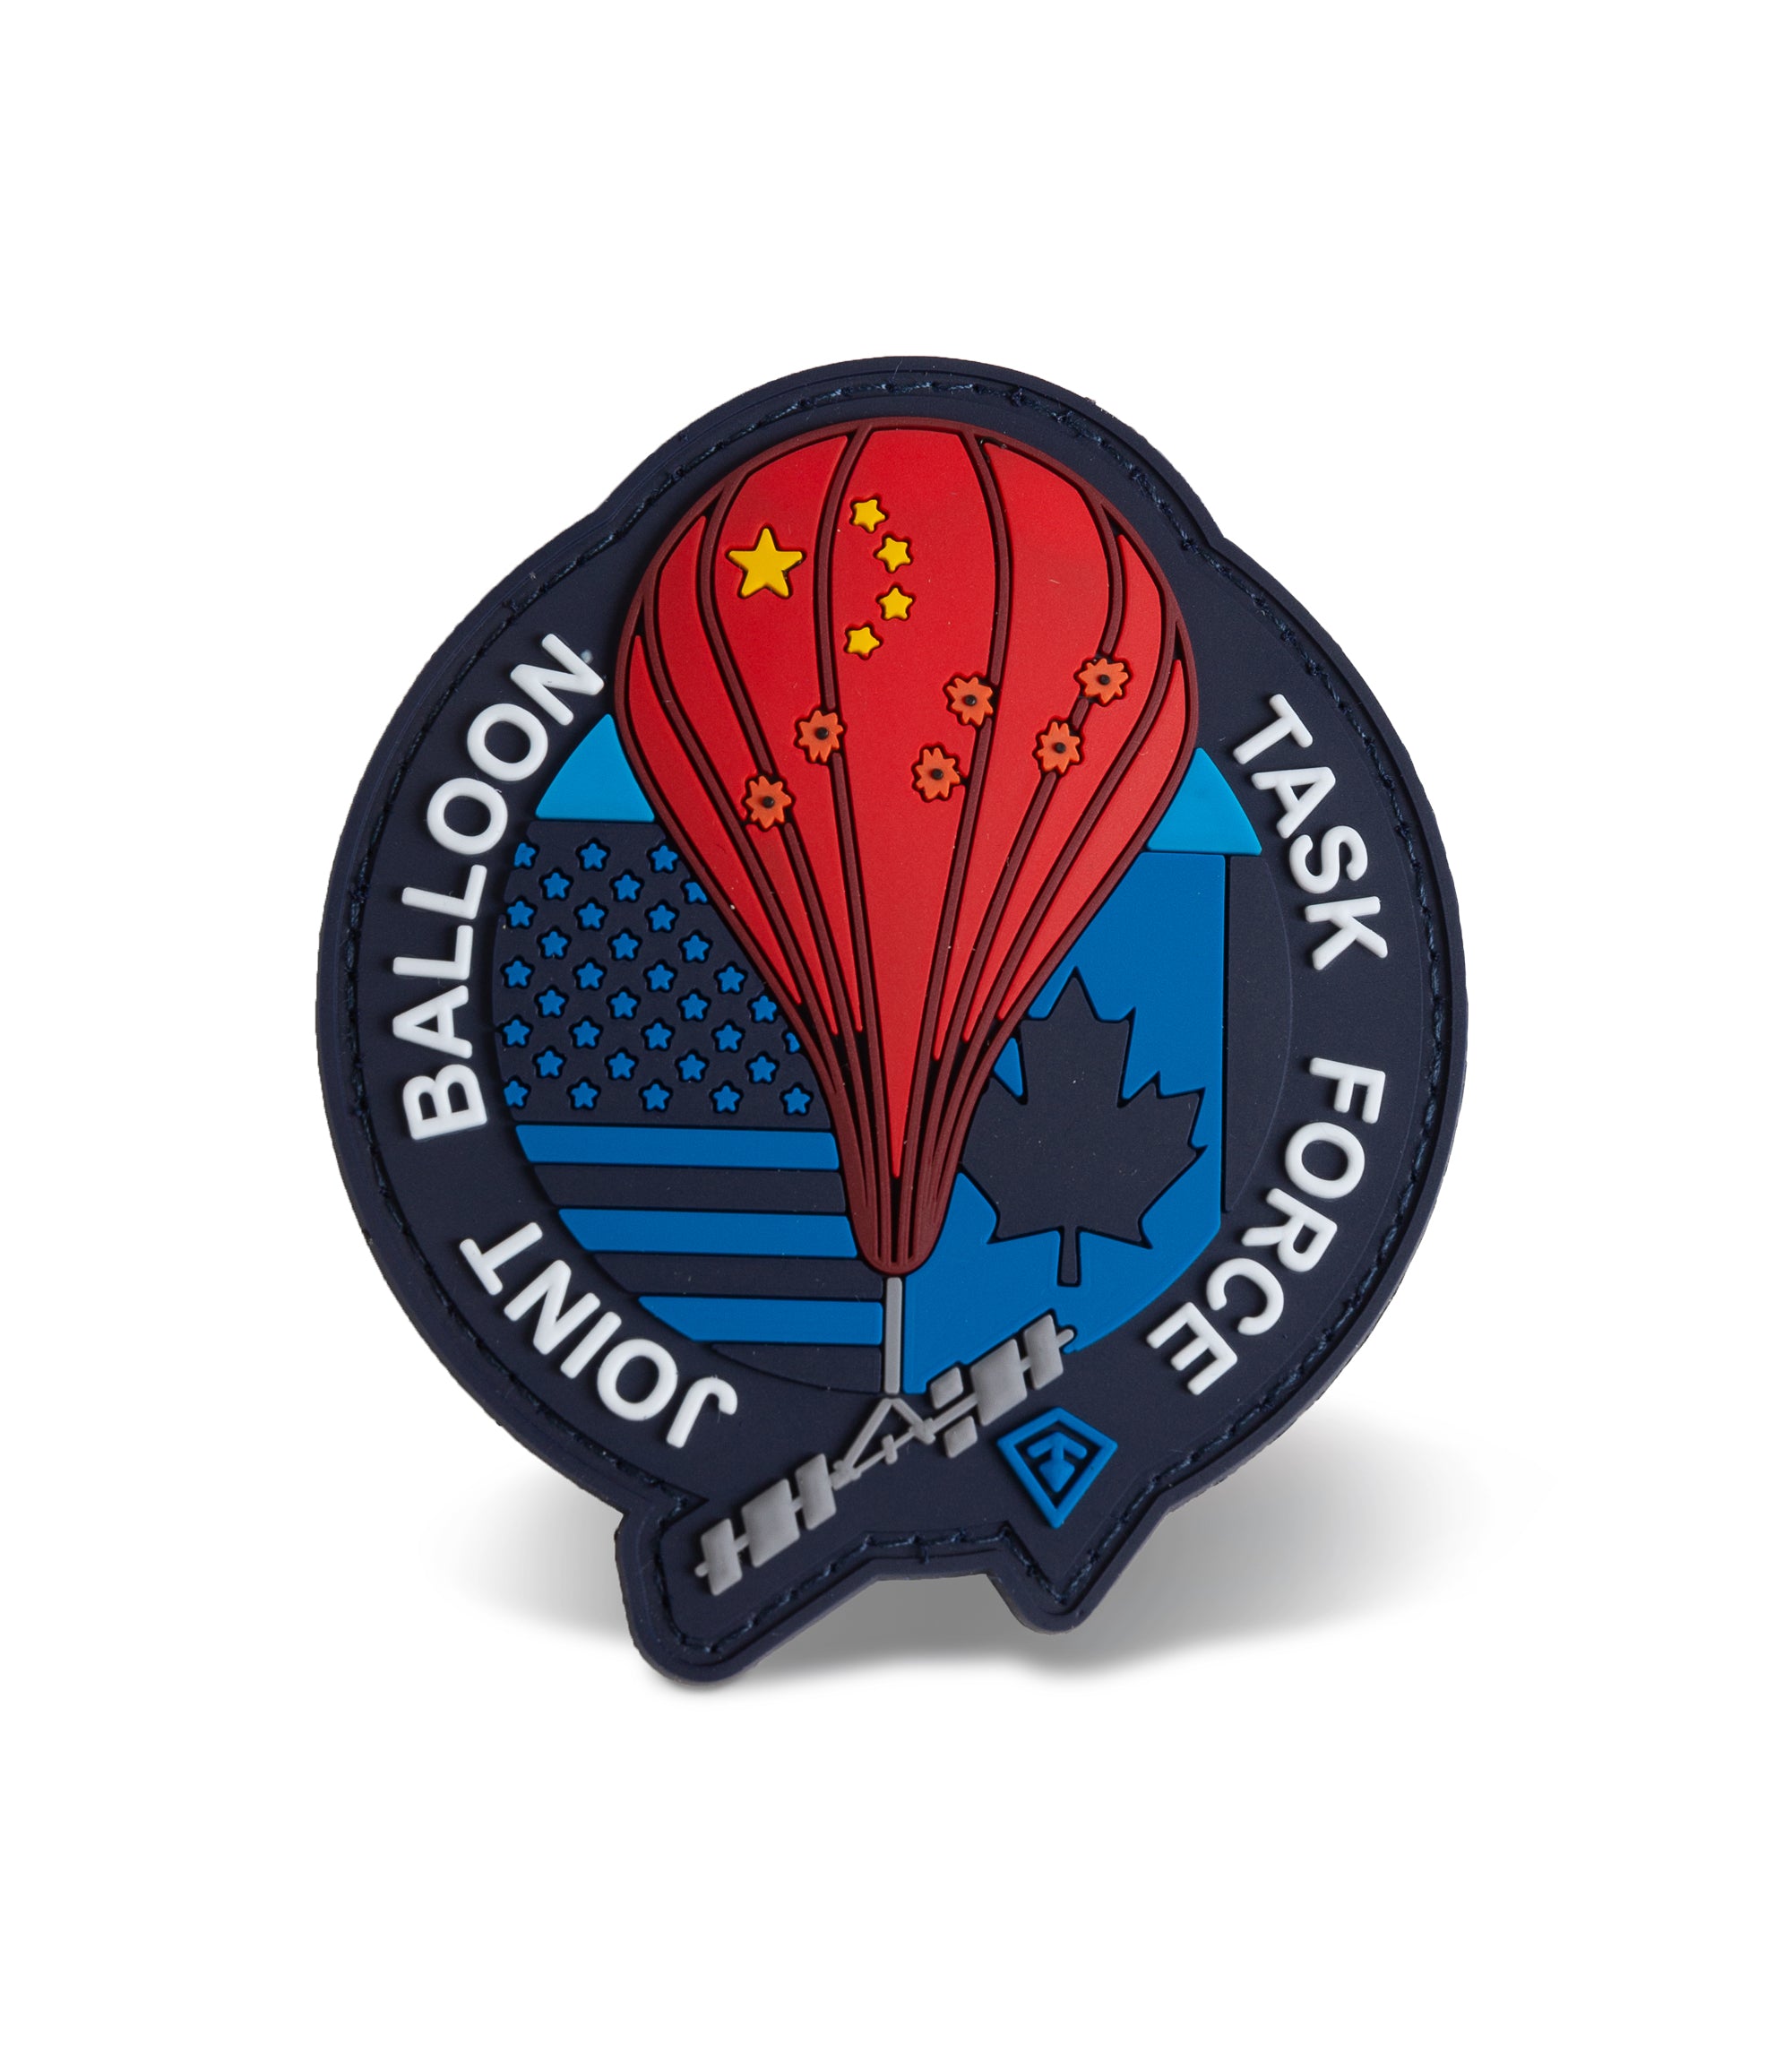 Joint Balloon Task Force Patch - Hook and Loop Patches - Patches for Tactical Vest - Tactical Morale Patches - Tactical Patches for Backpacks 